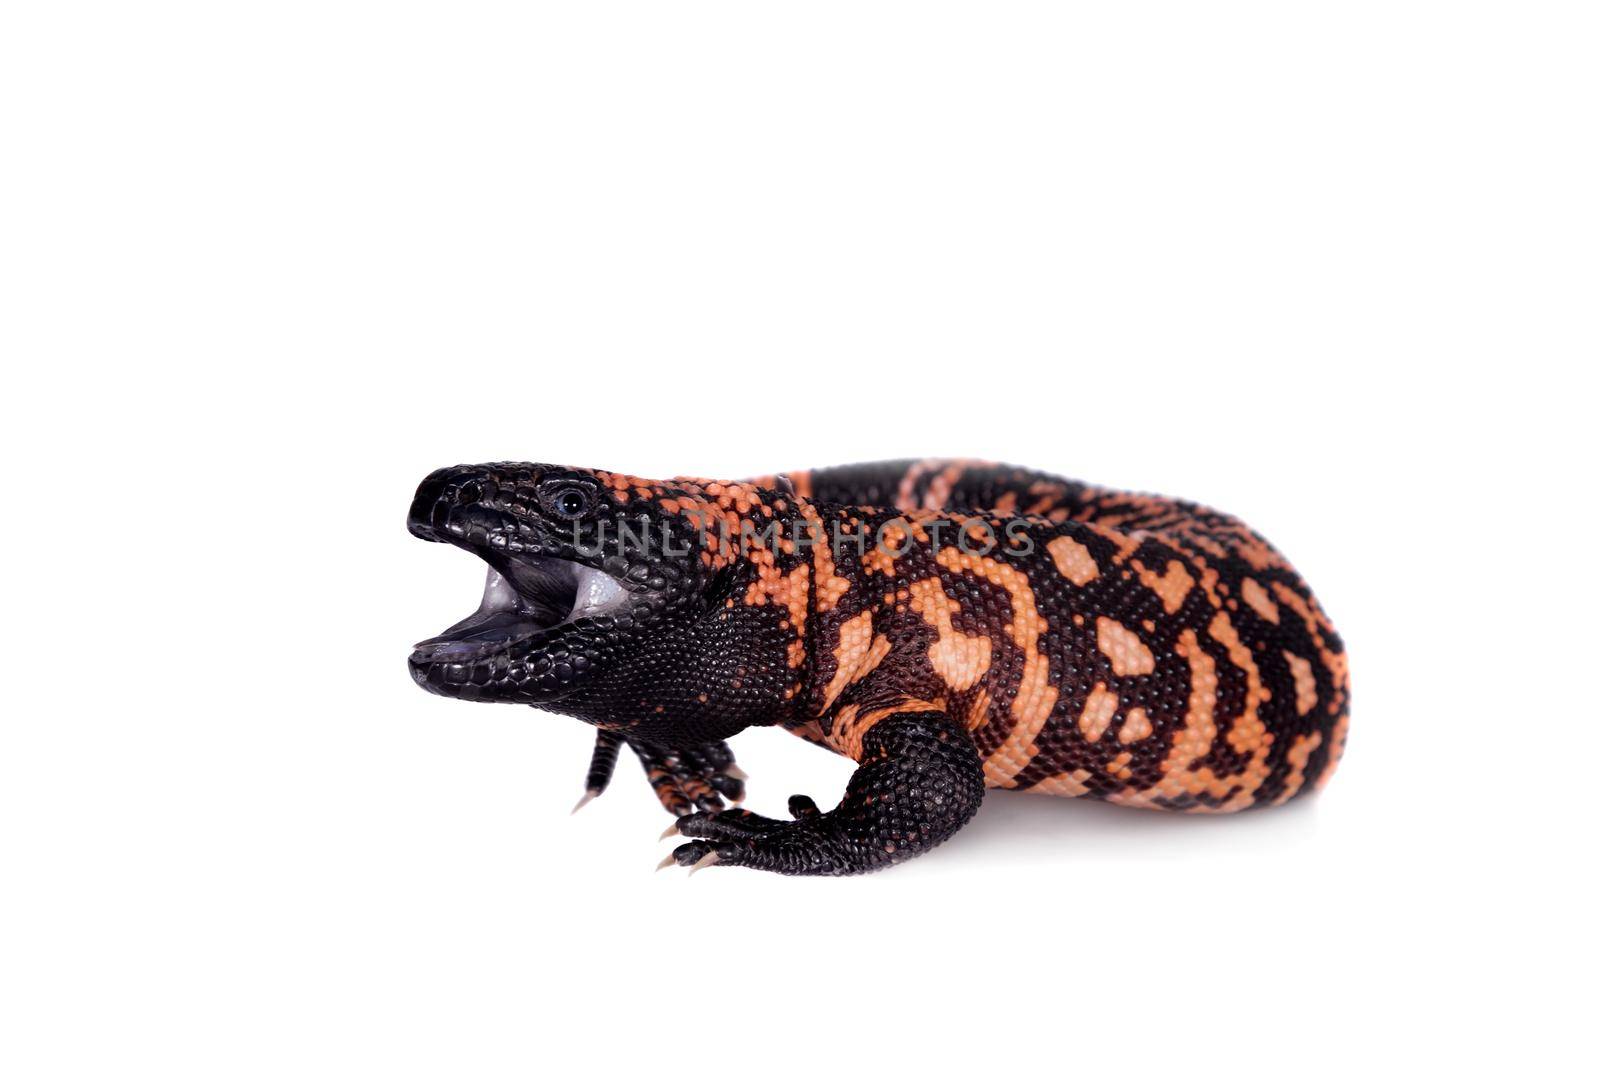 Gila Monster isolated on white by RosaJay